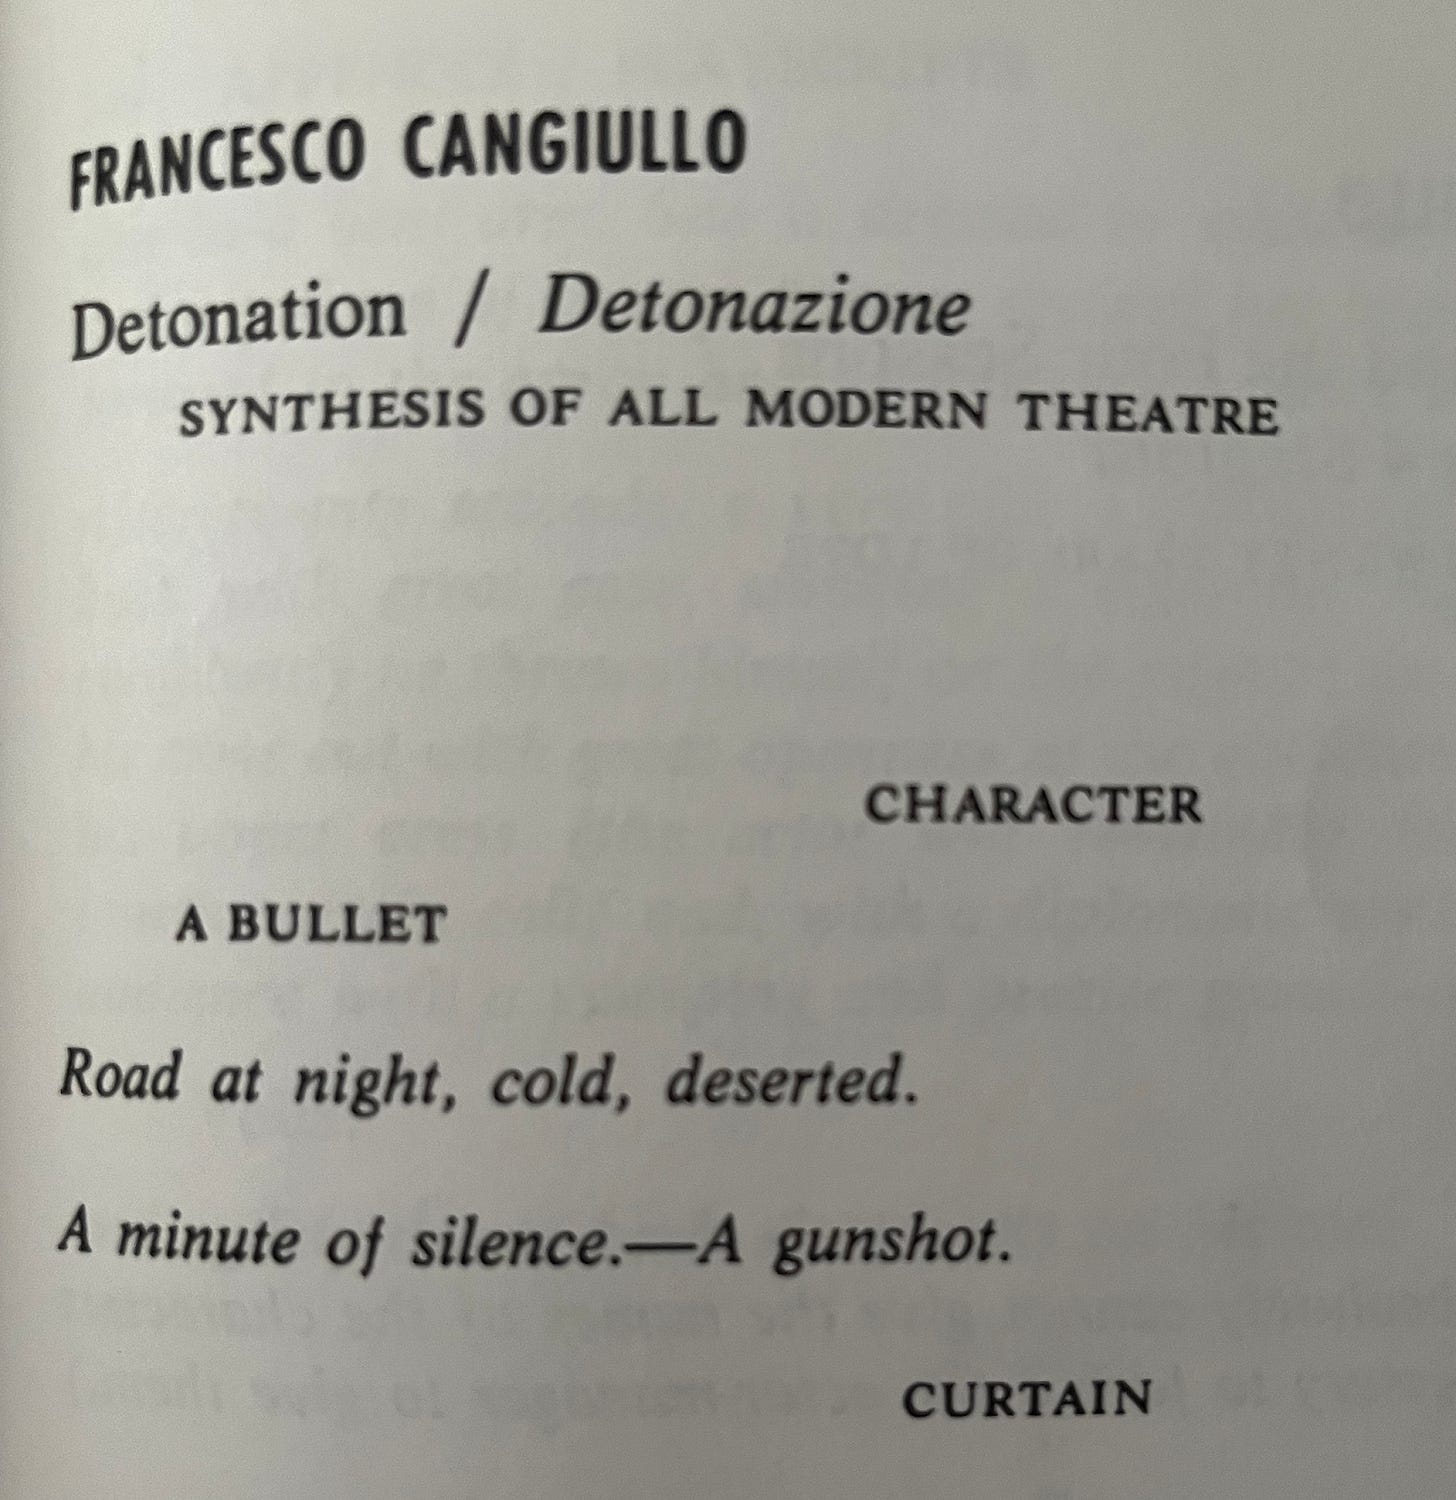 The script for “Detonation: Synthesis of All Modern Theatre” in which an unnamed character says “a bullet” and then, after a minute of silence – a gunshot. Curtain. 